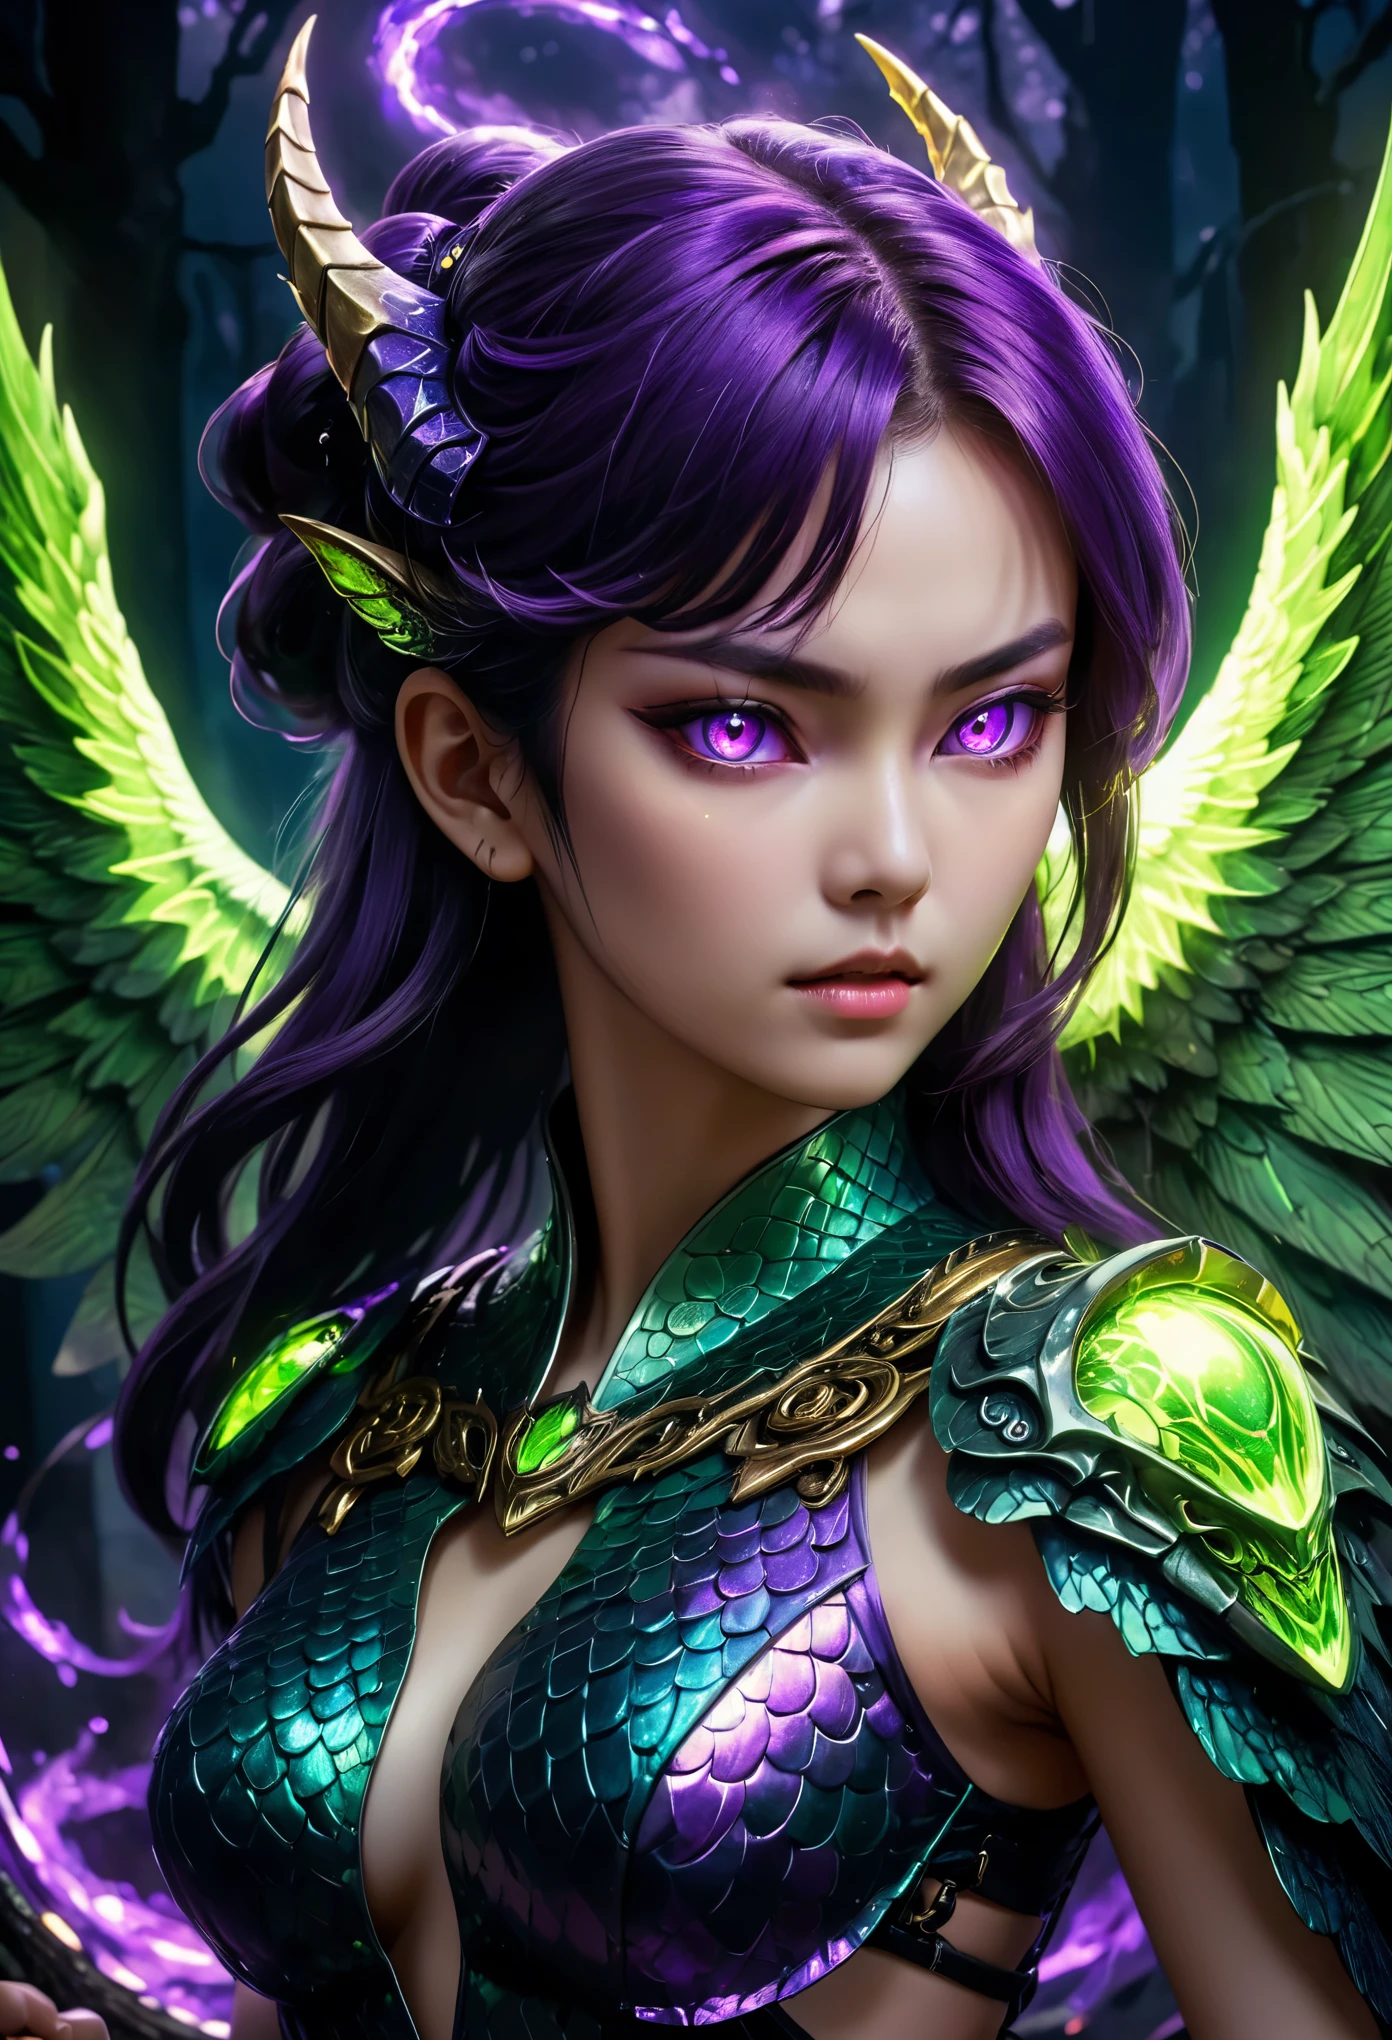 Artist by Tintoretto, masterpiece (best quality: 1.3), super detailed, complex, 8k, HDR, wallpaper, dynamic movements, color scheme, (upper body close-up), Dragon Girl, (detailed eyes, face covered with scales, serrated mouth), necrotic scaly skin, black, purple, neon green, ominous light, glowing, ghostly fiery eyes, protruding bone fragments on wings, eerie halo Shining runes, sharp claws, spectral tones, drifting lights, mythological creatures, Japanese manga style